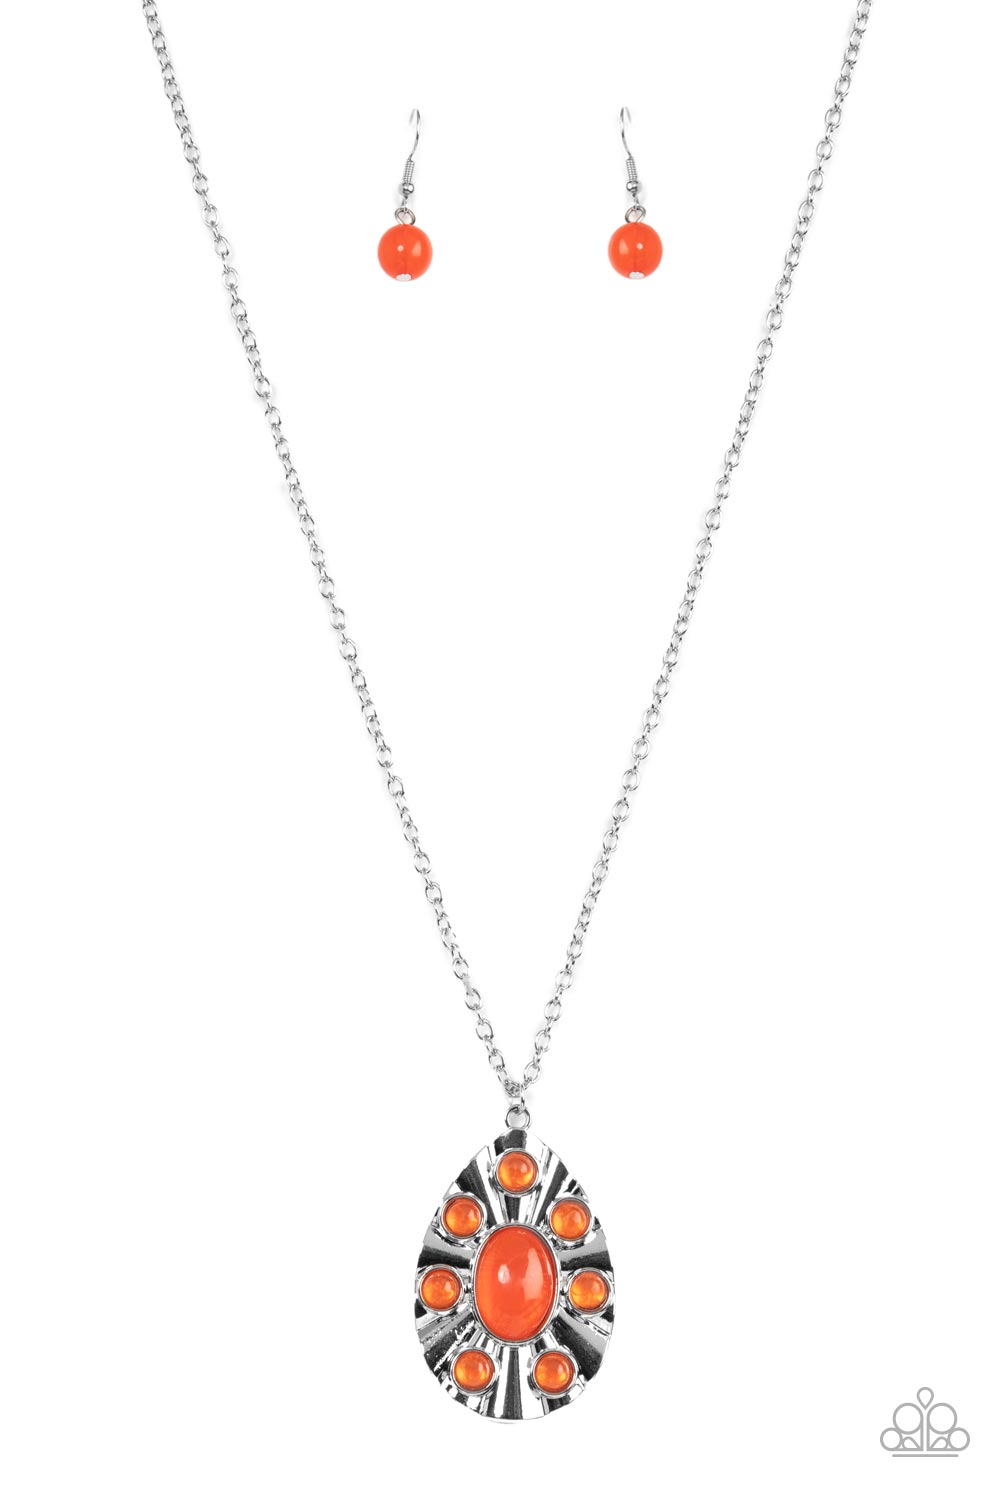 Blissfully Bohemian - Orange Necklace - Paparazzi Accessories - Alies Bling Bar